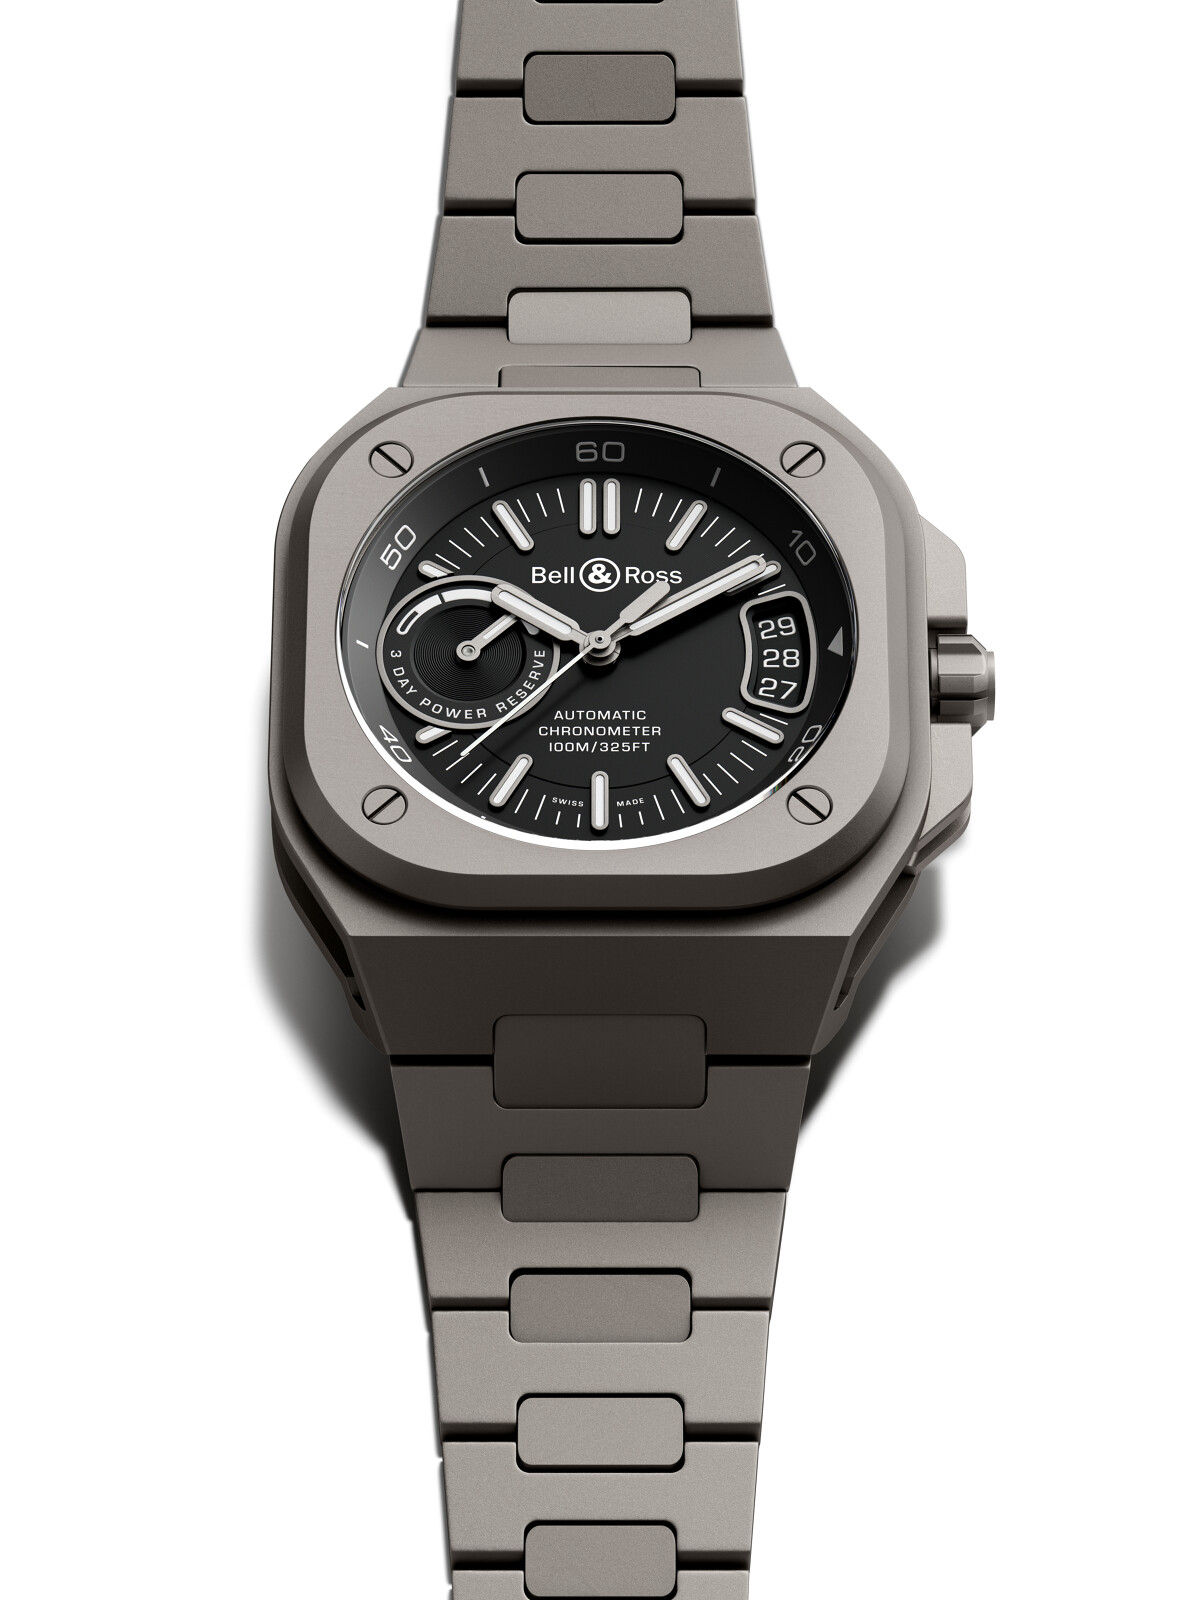 Elevated in Microblasted Ti, this is the Bell & Ross BR-X5 Black Titanium